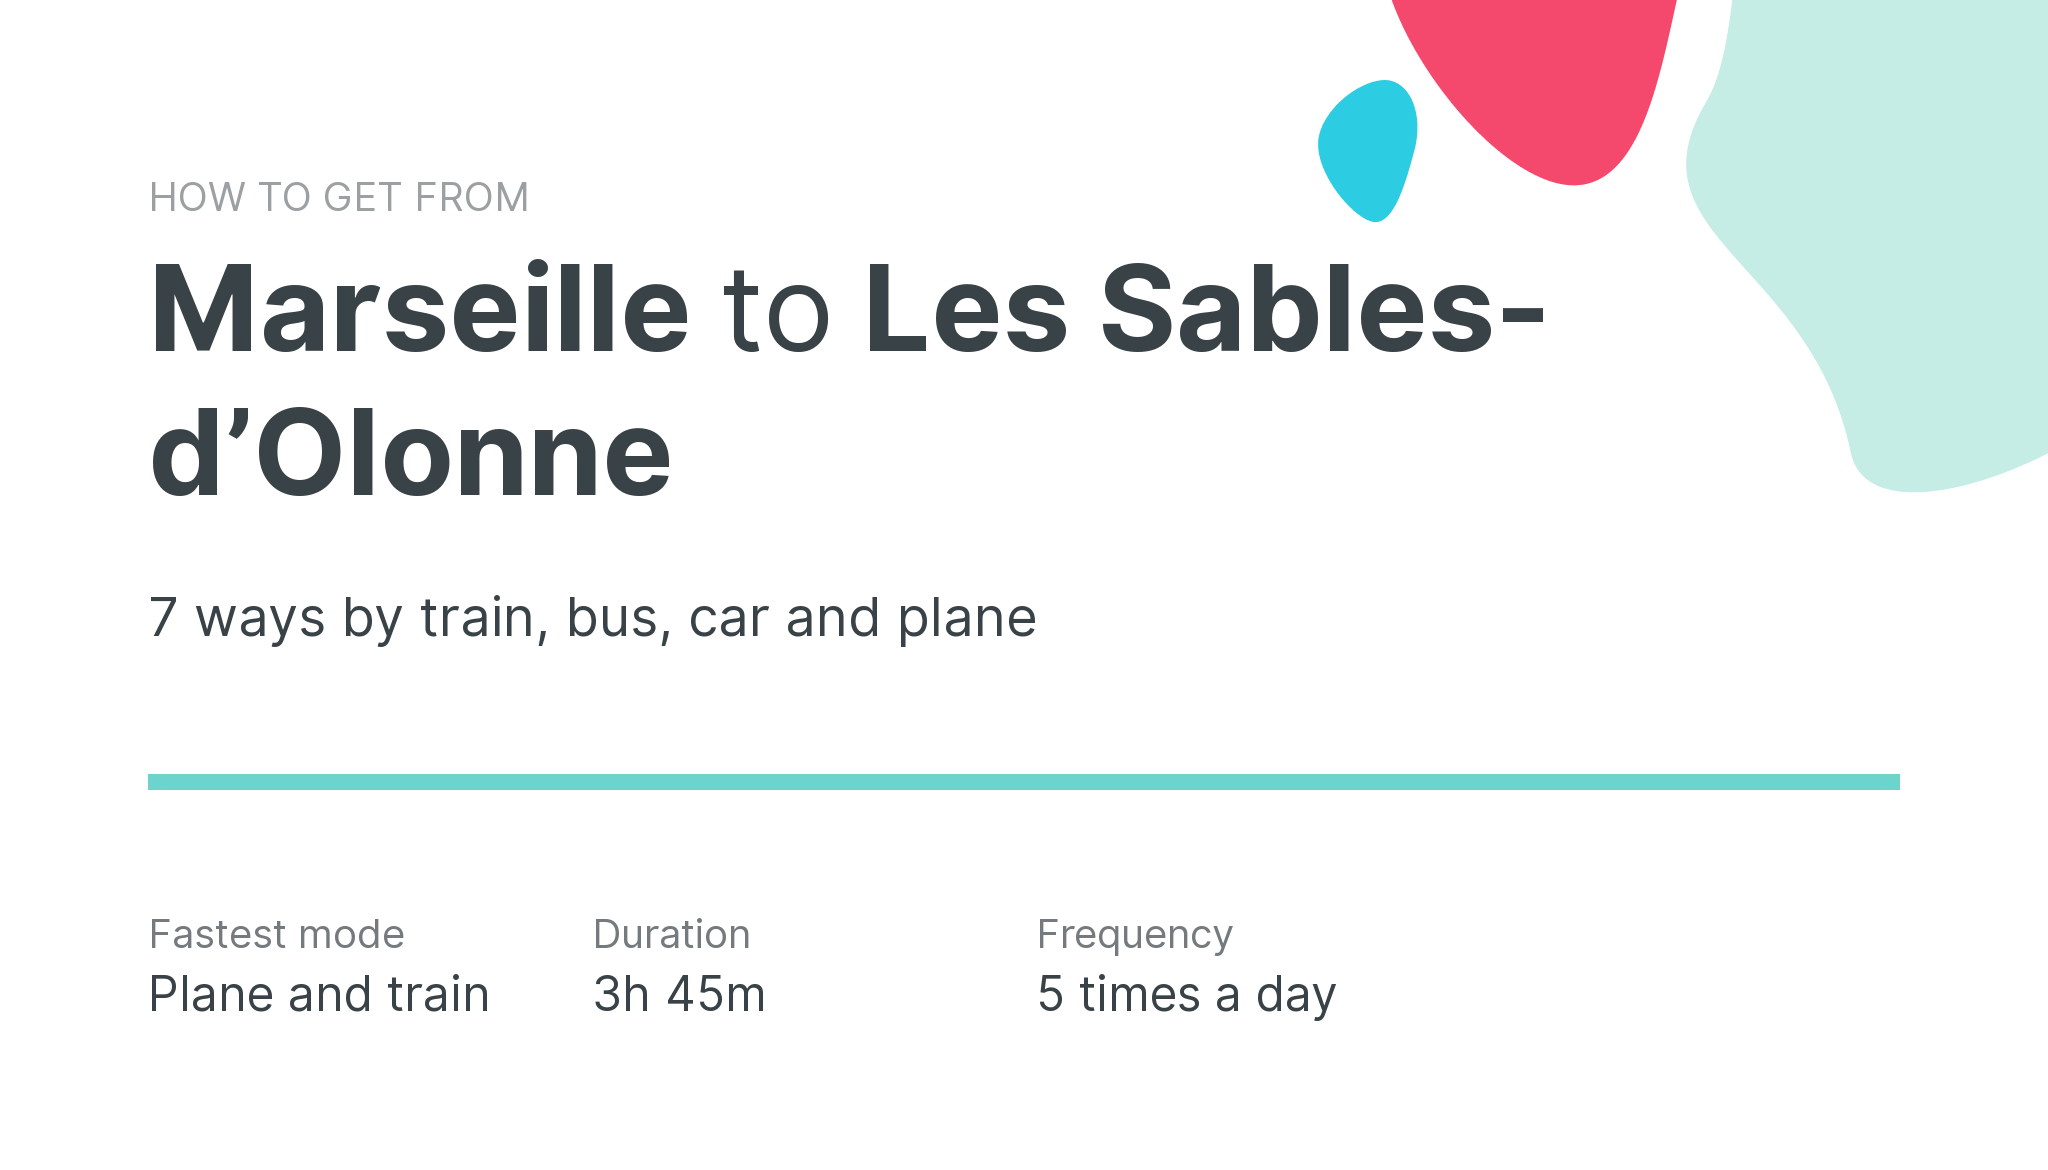 How do I get from Marseille to Les Sables-dʼOlonne